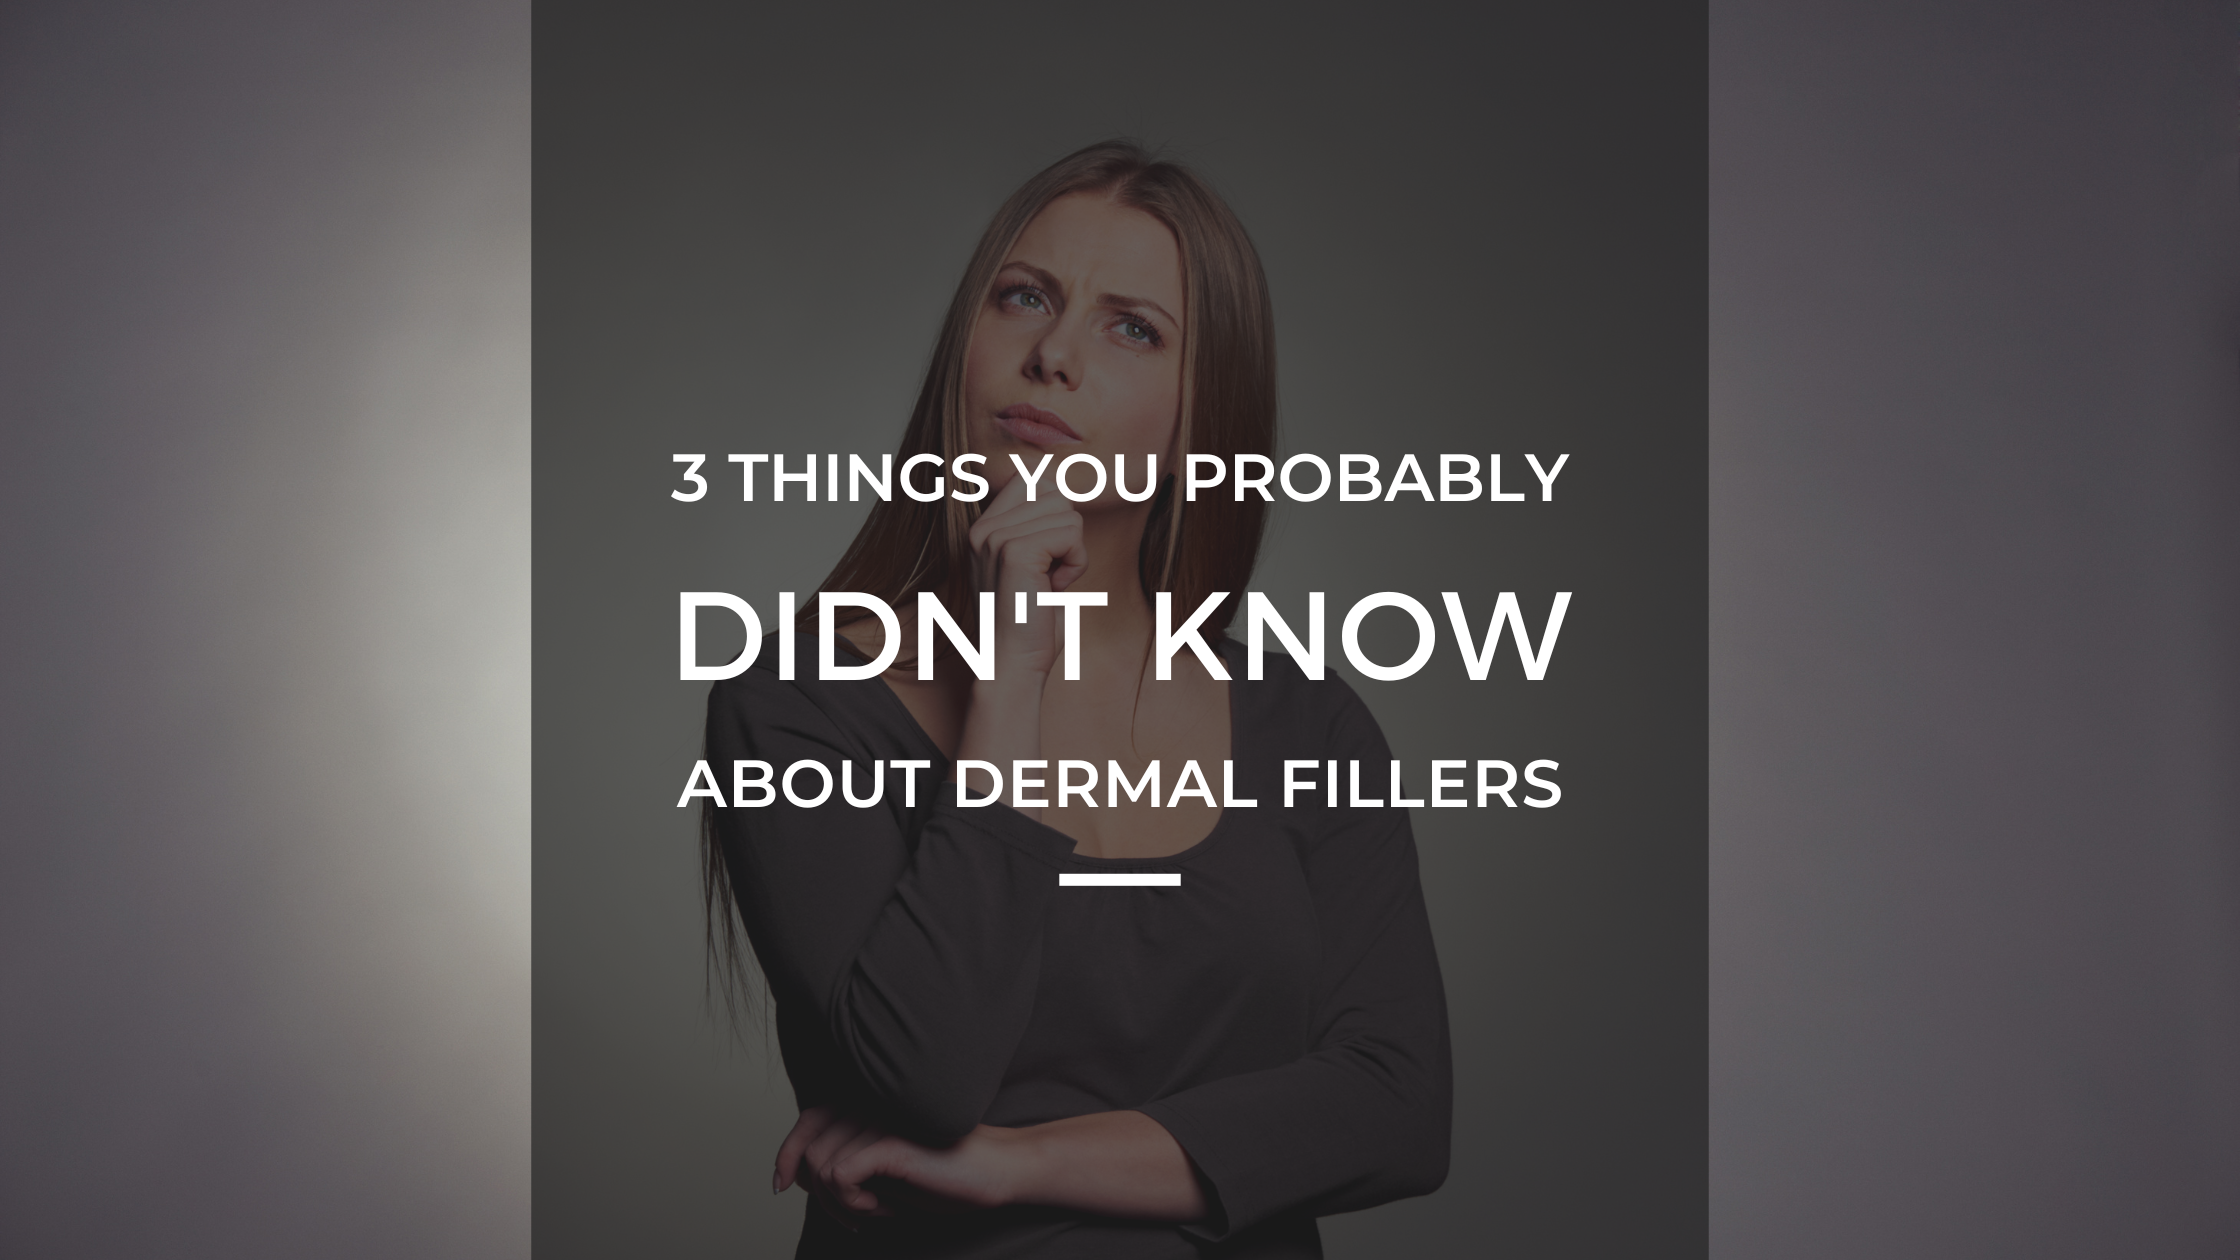 3 things you probably didn't know about dermal fillers